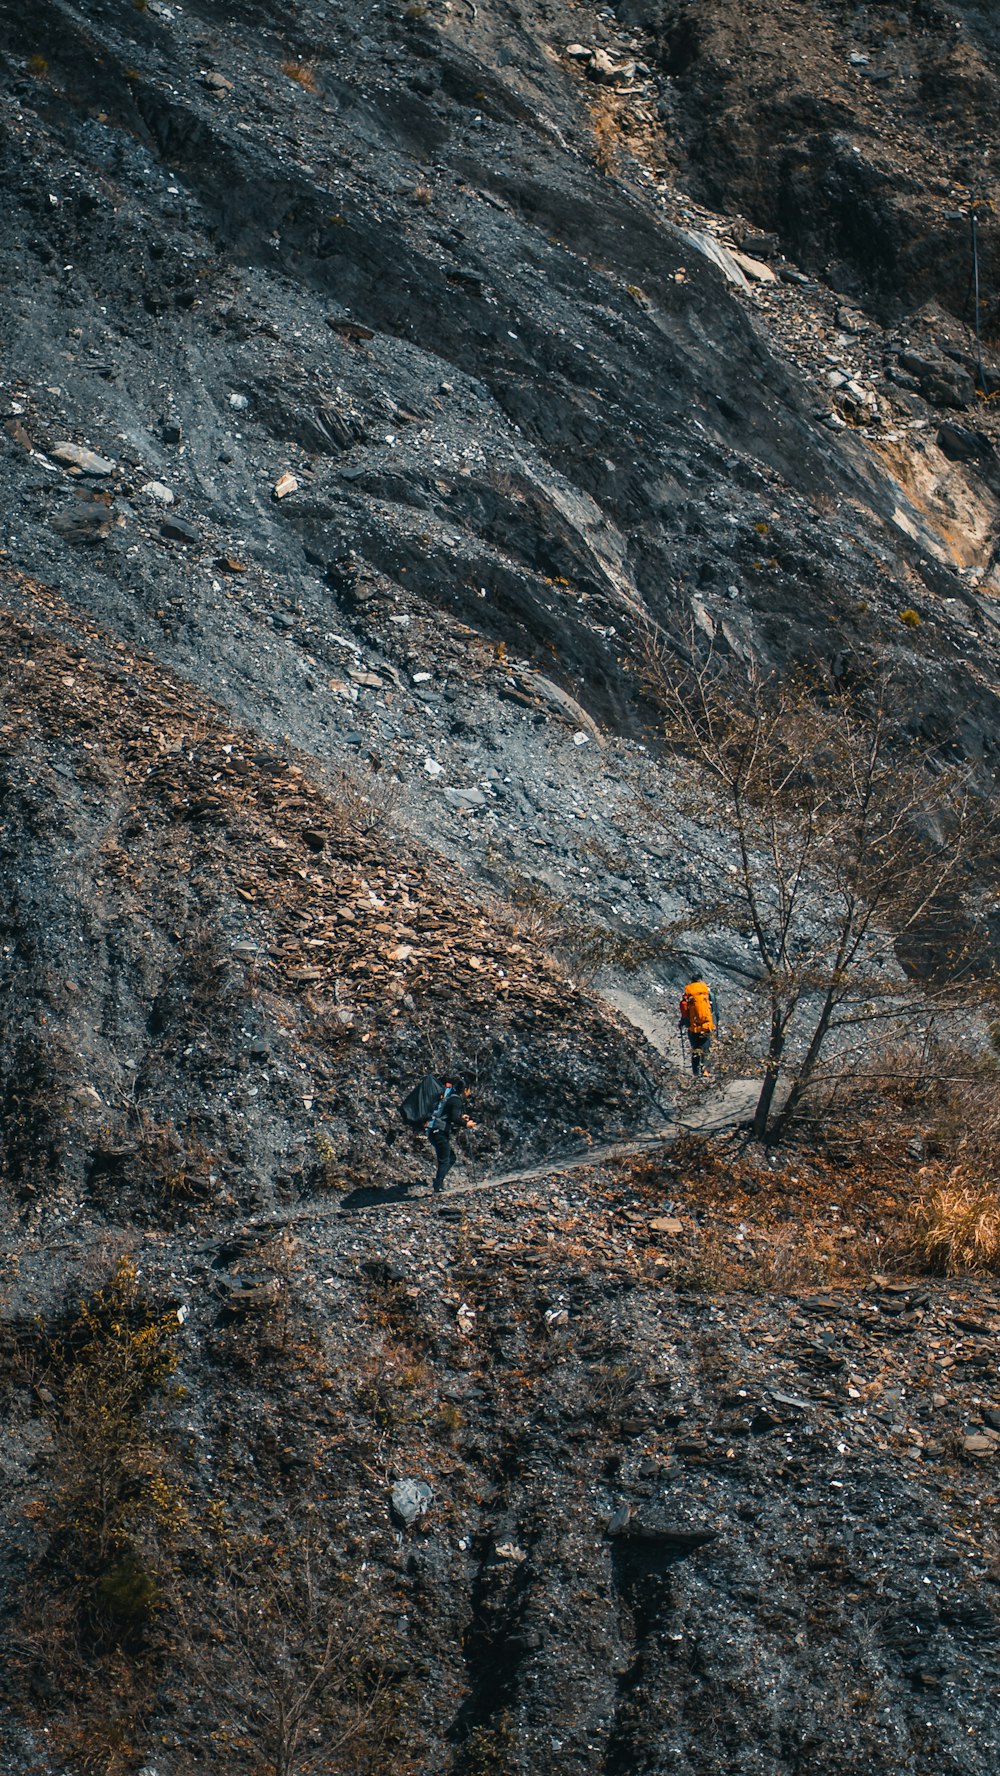 a person walking up a trail in the mountains